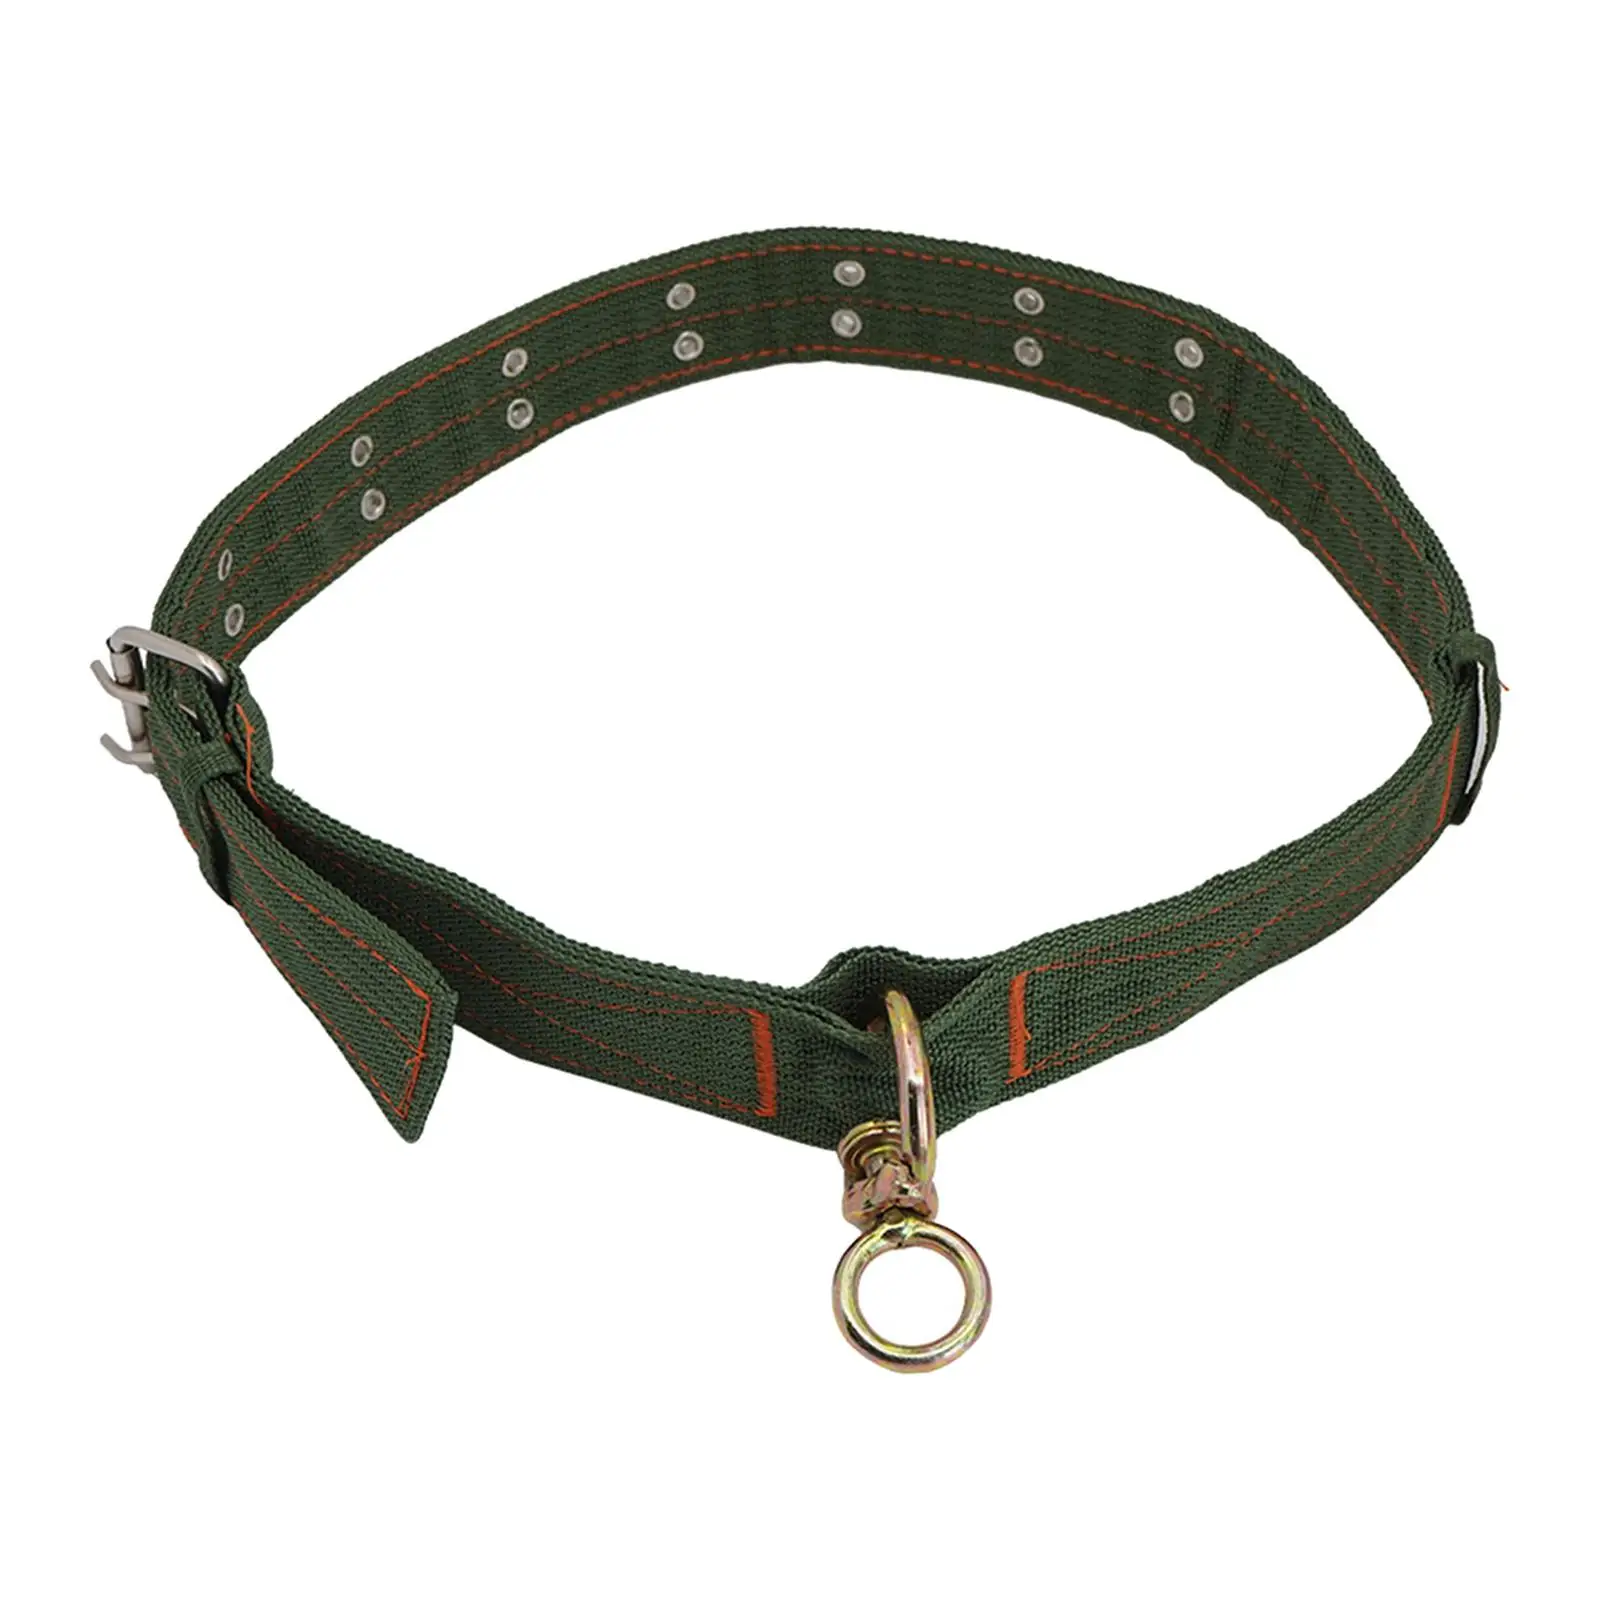 Cattle Neck Cow Neck Belt Four Layer Thickened 2 Rows Metal Buckle Chain Sheep Neck Large Dog Neckwear for Camel